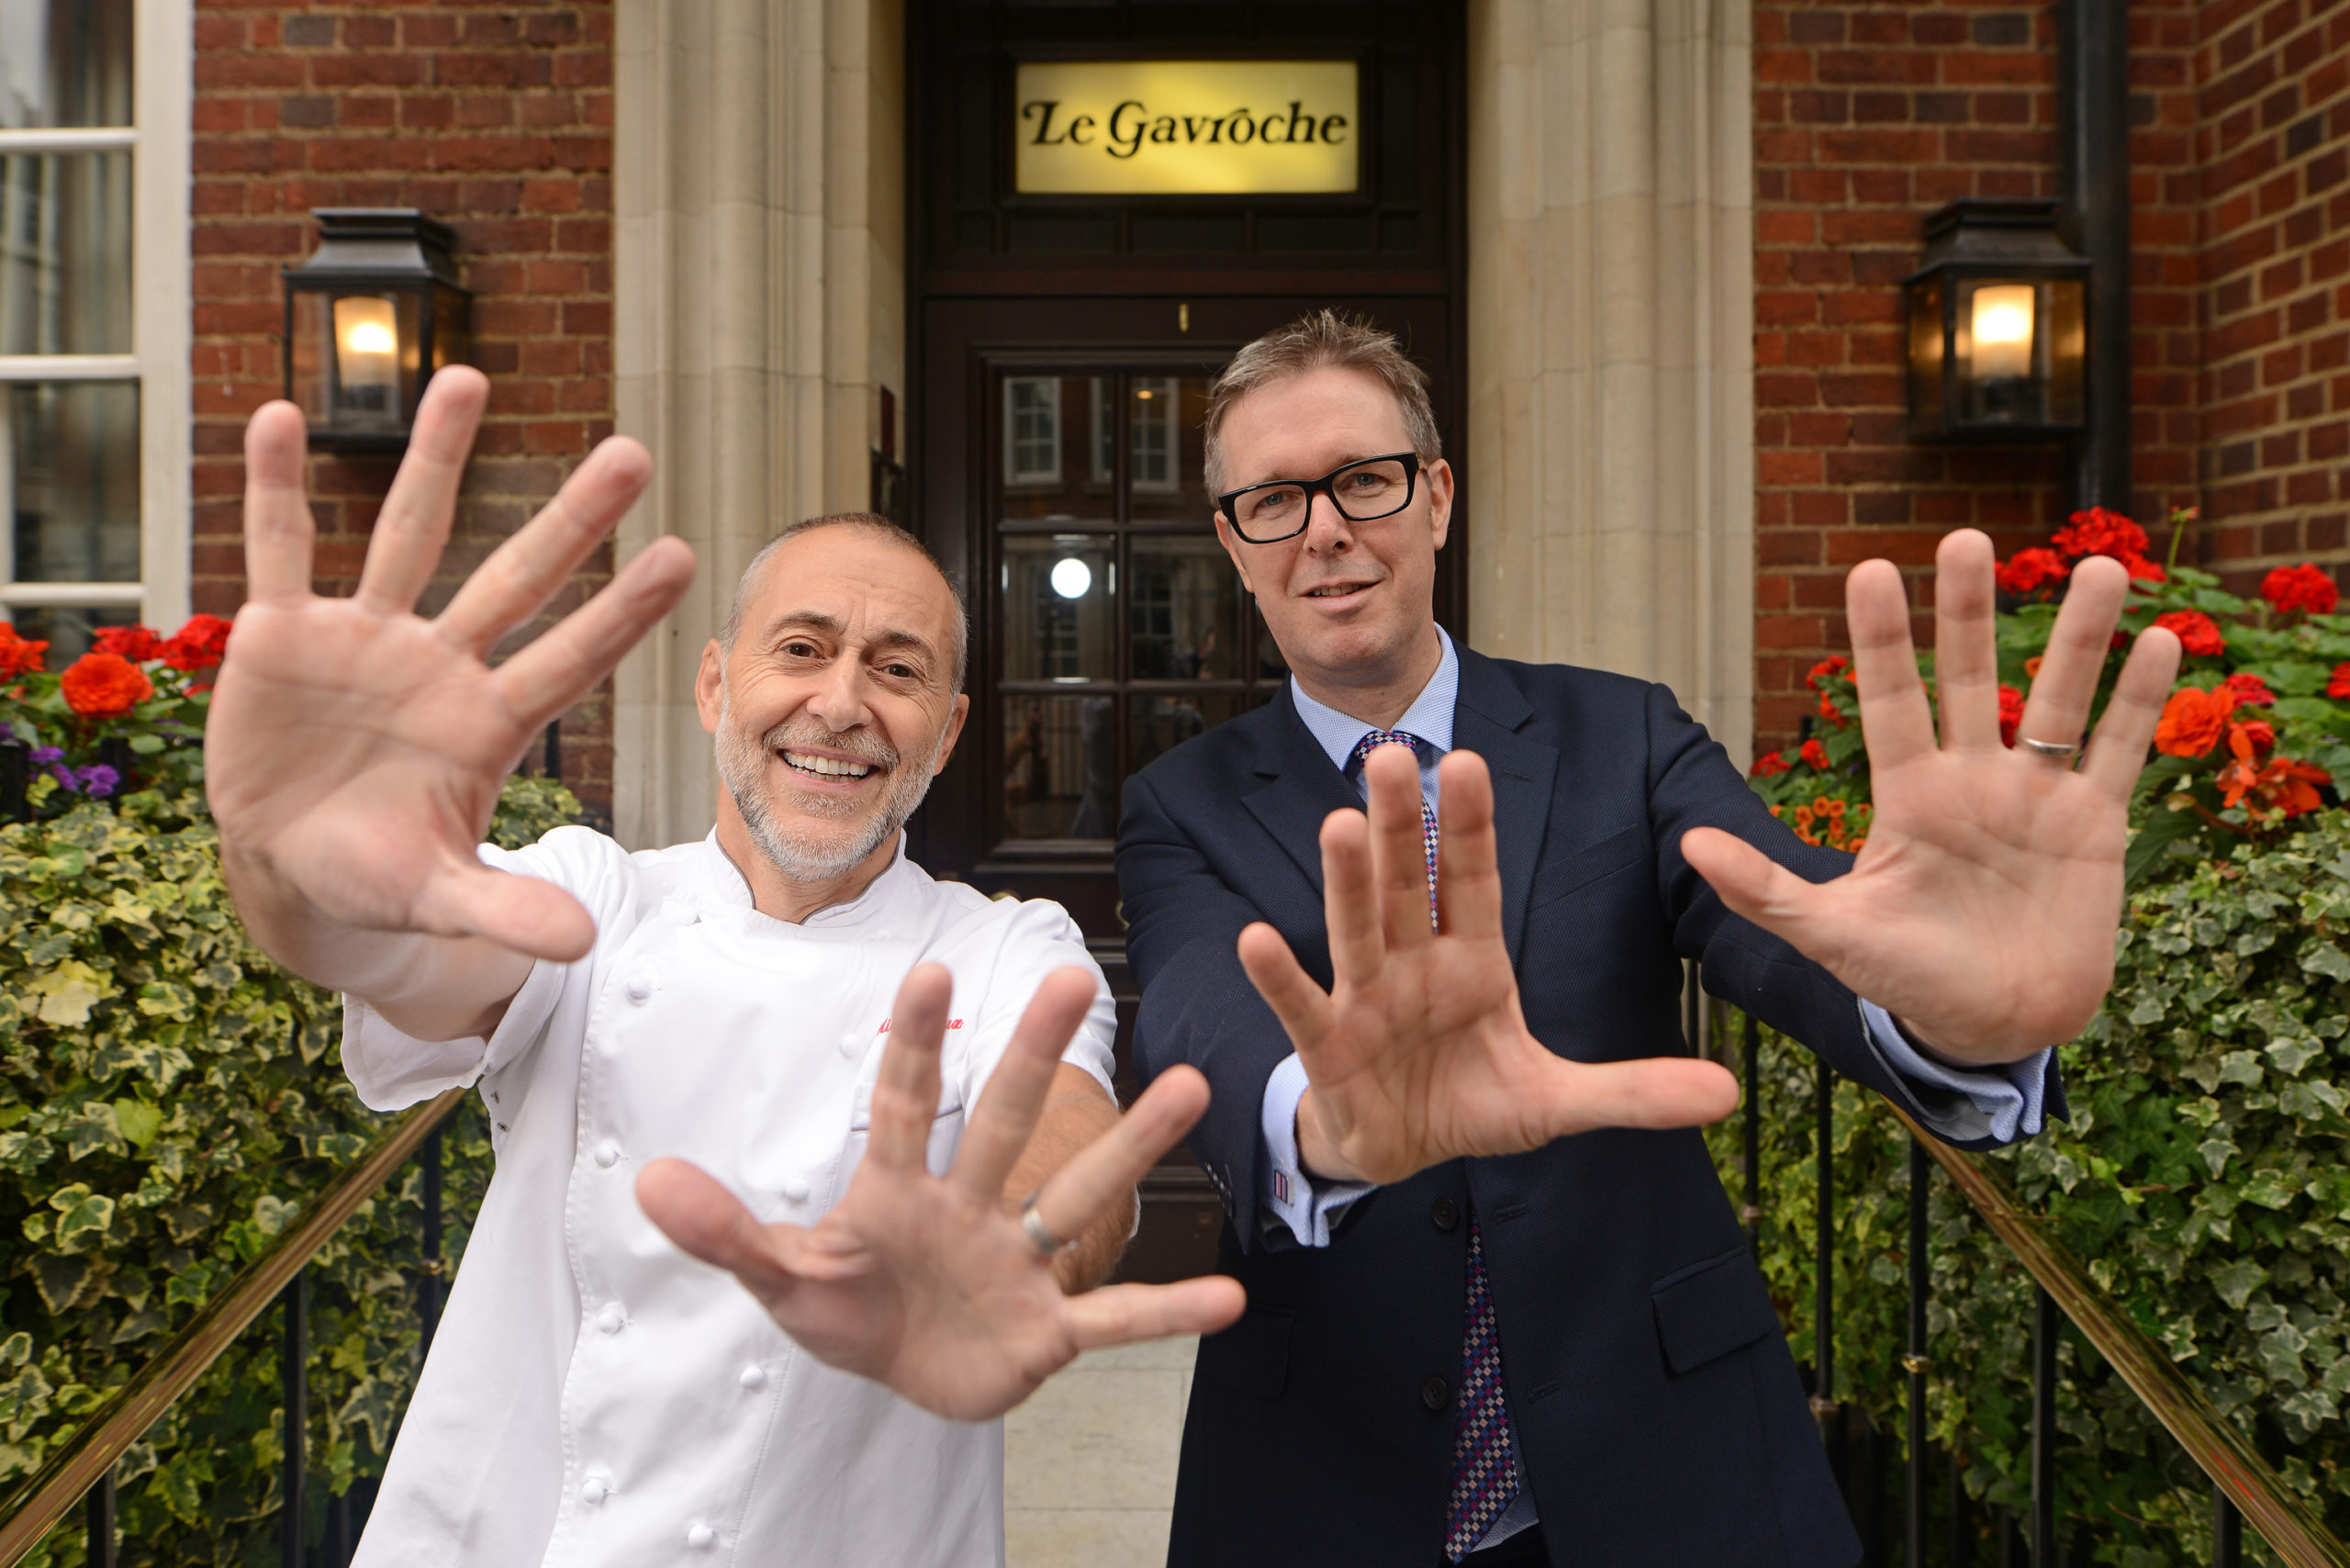 Alex Cheatle & Michel Roux Jr outside Le Gavroche, a restaurant frequented by our members, many of whom are corporate members through their banks